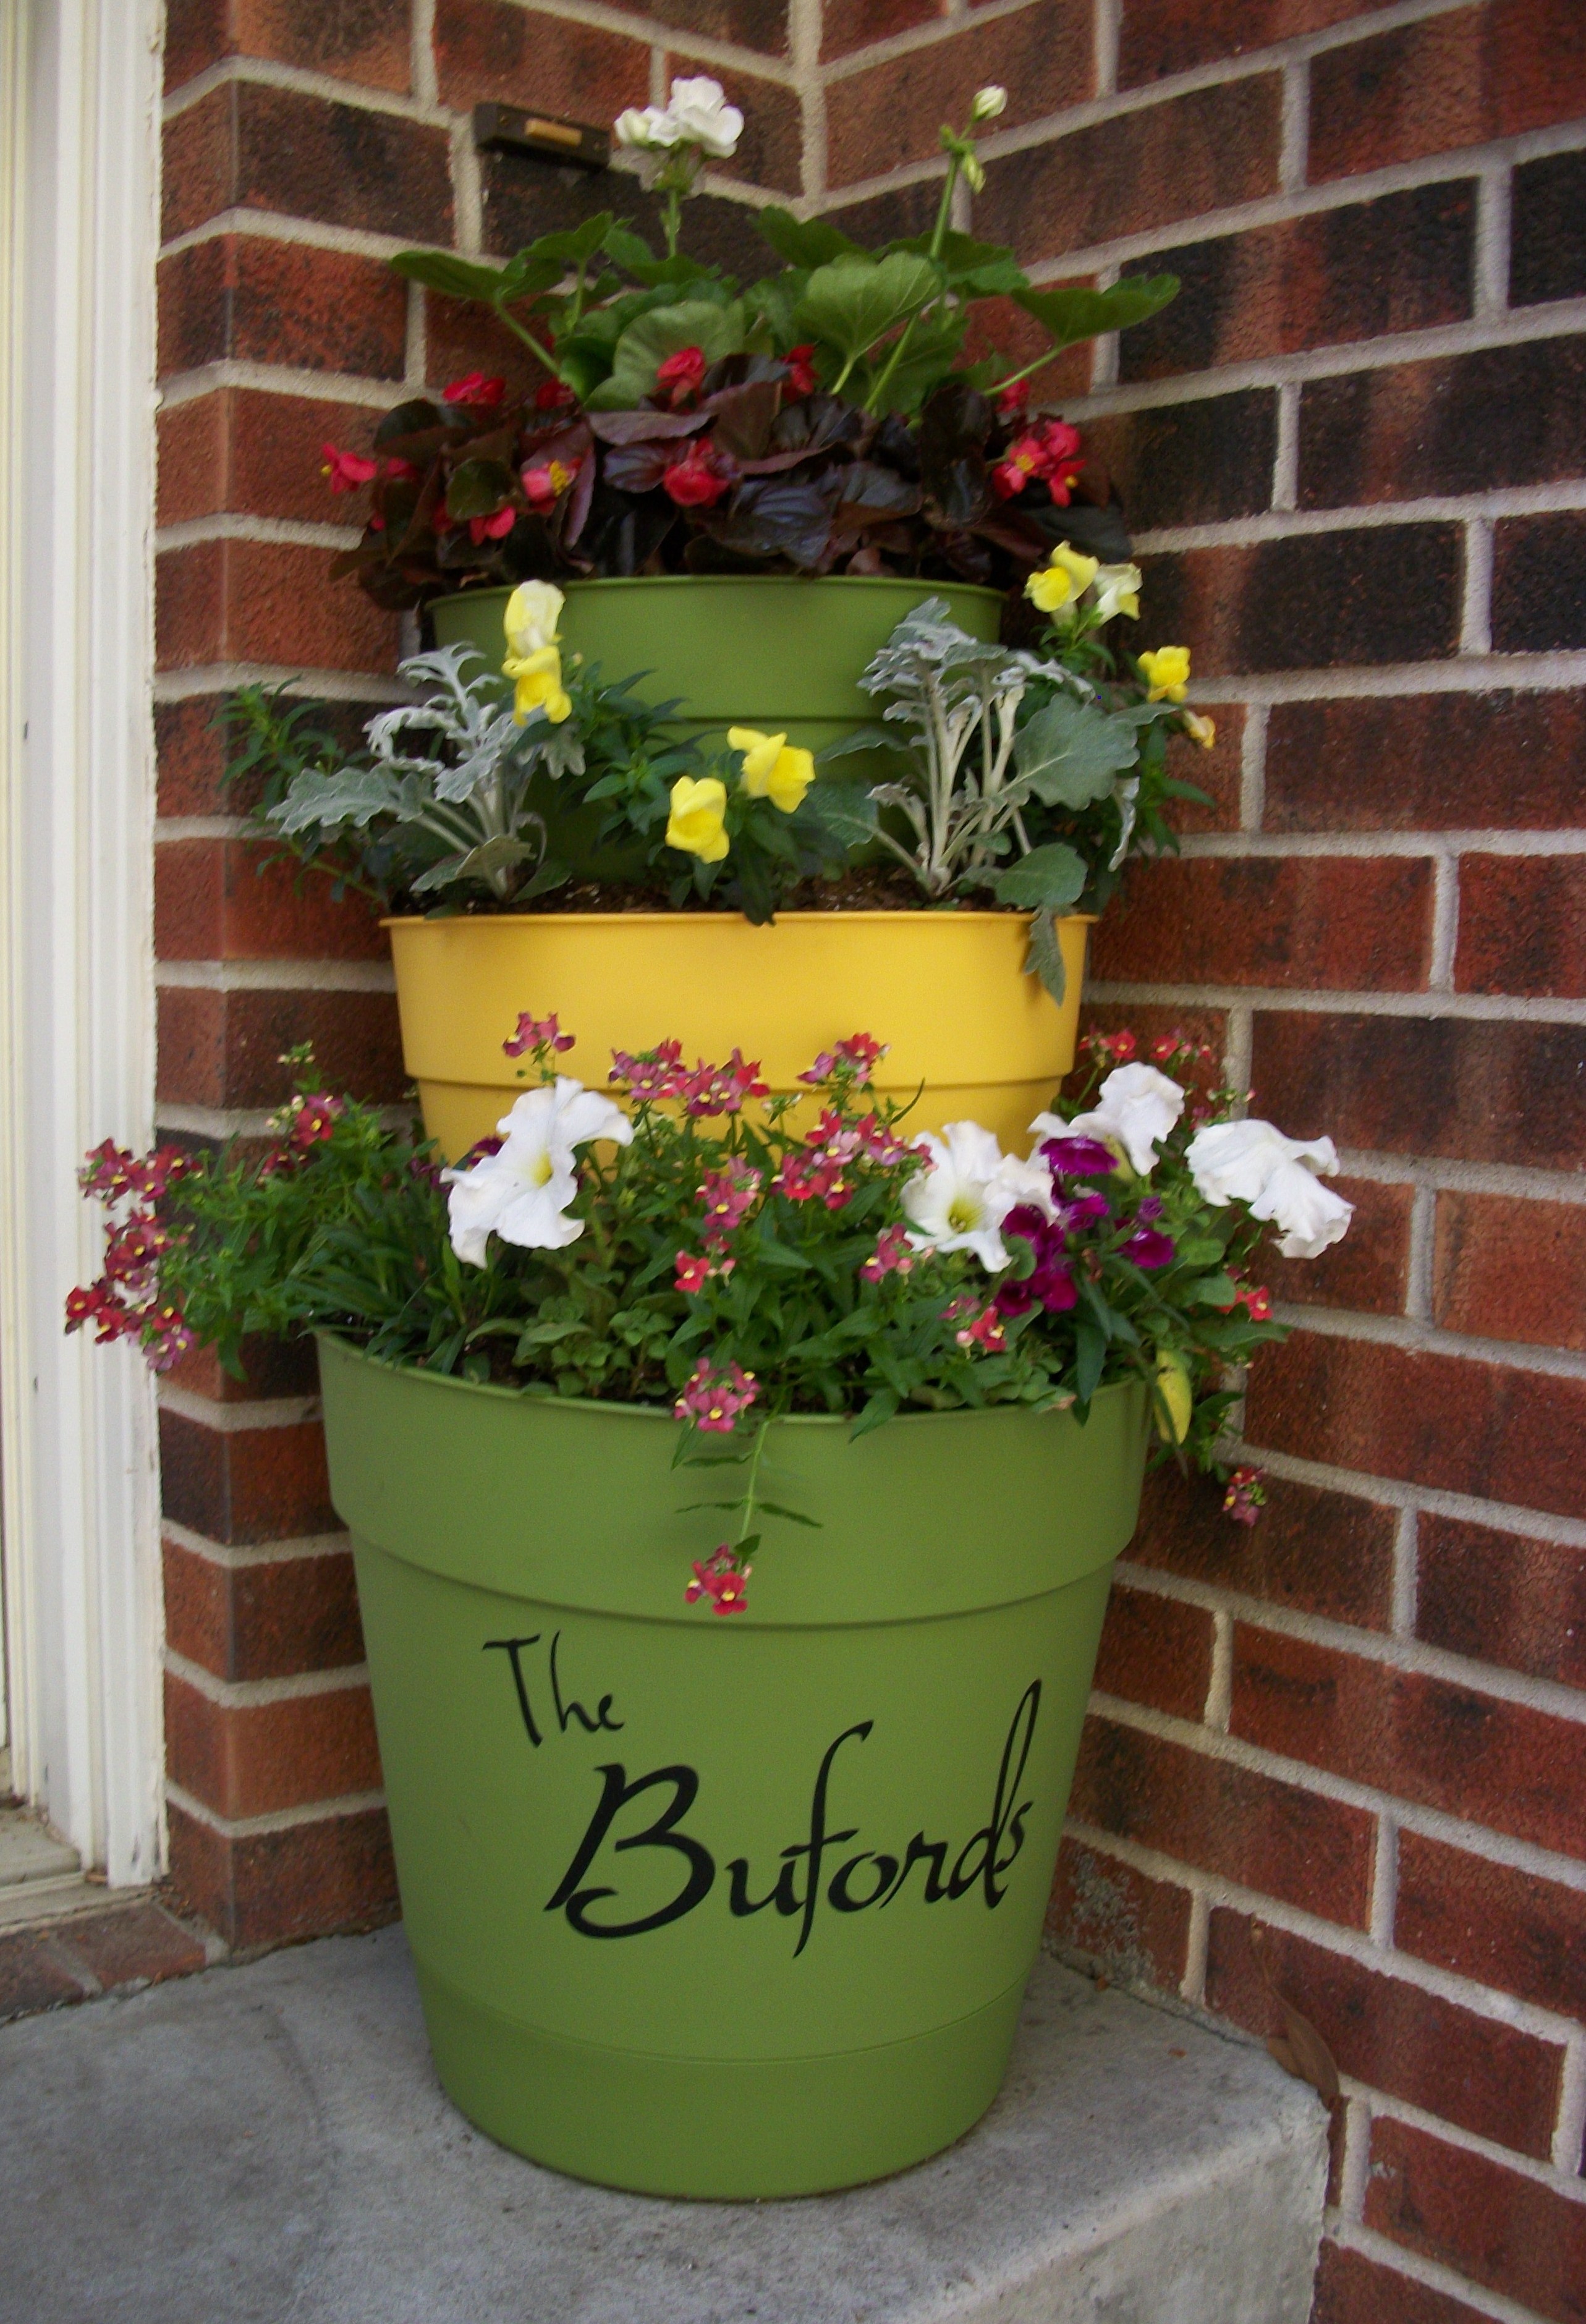 Tiered Planter Ideas That You Can Easily Make With Clay Pots   Page 2 of 2